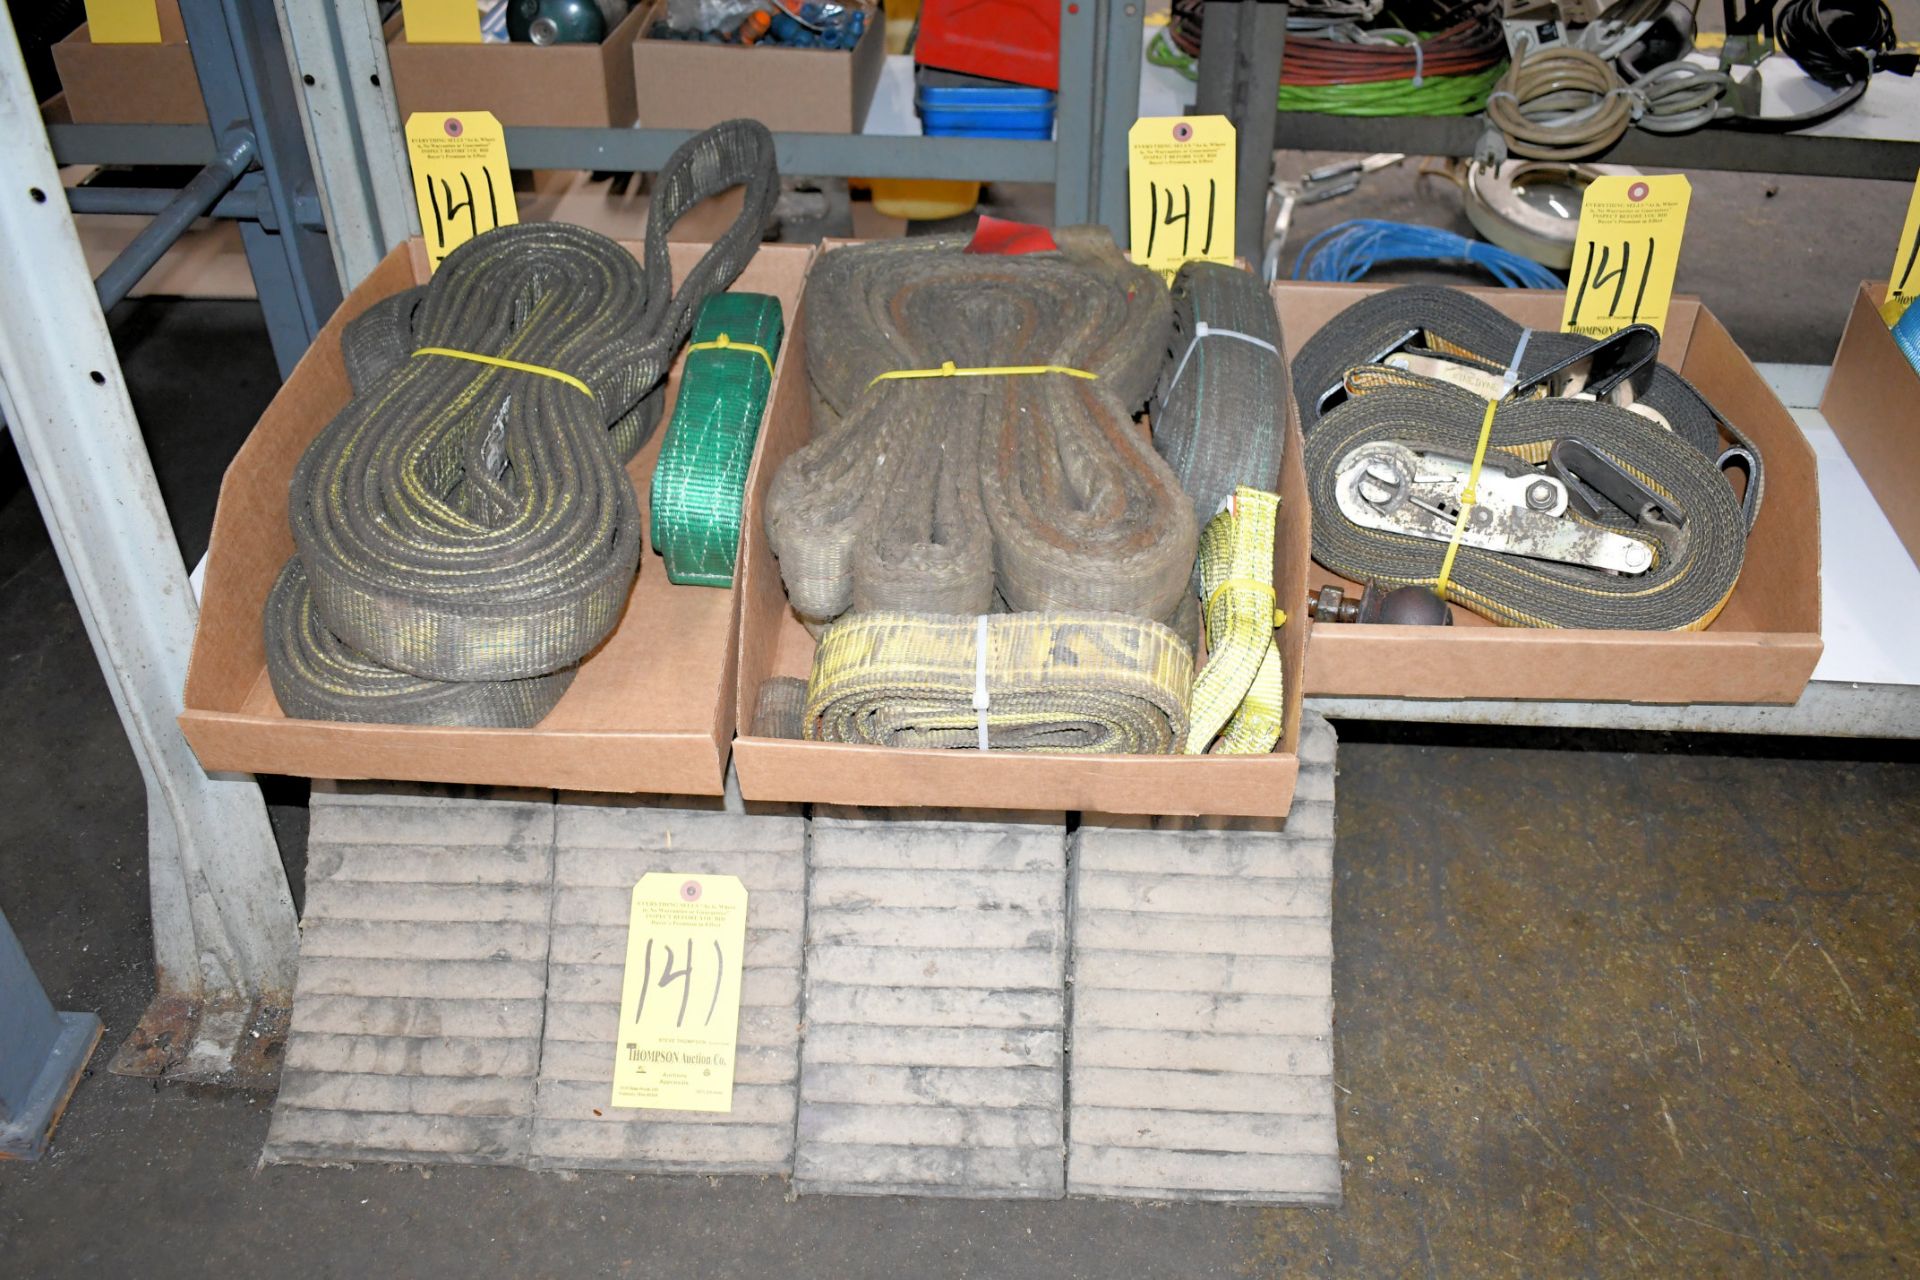 Lot-Large Cloth Slings and (2) Ratchet Straps in (3) Boxes with (4) Wheel Chocks, Under (1) Bench